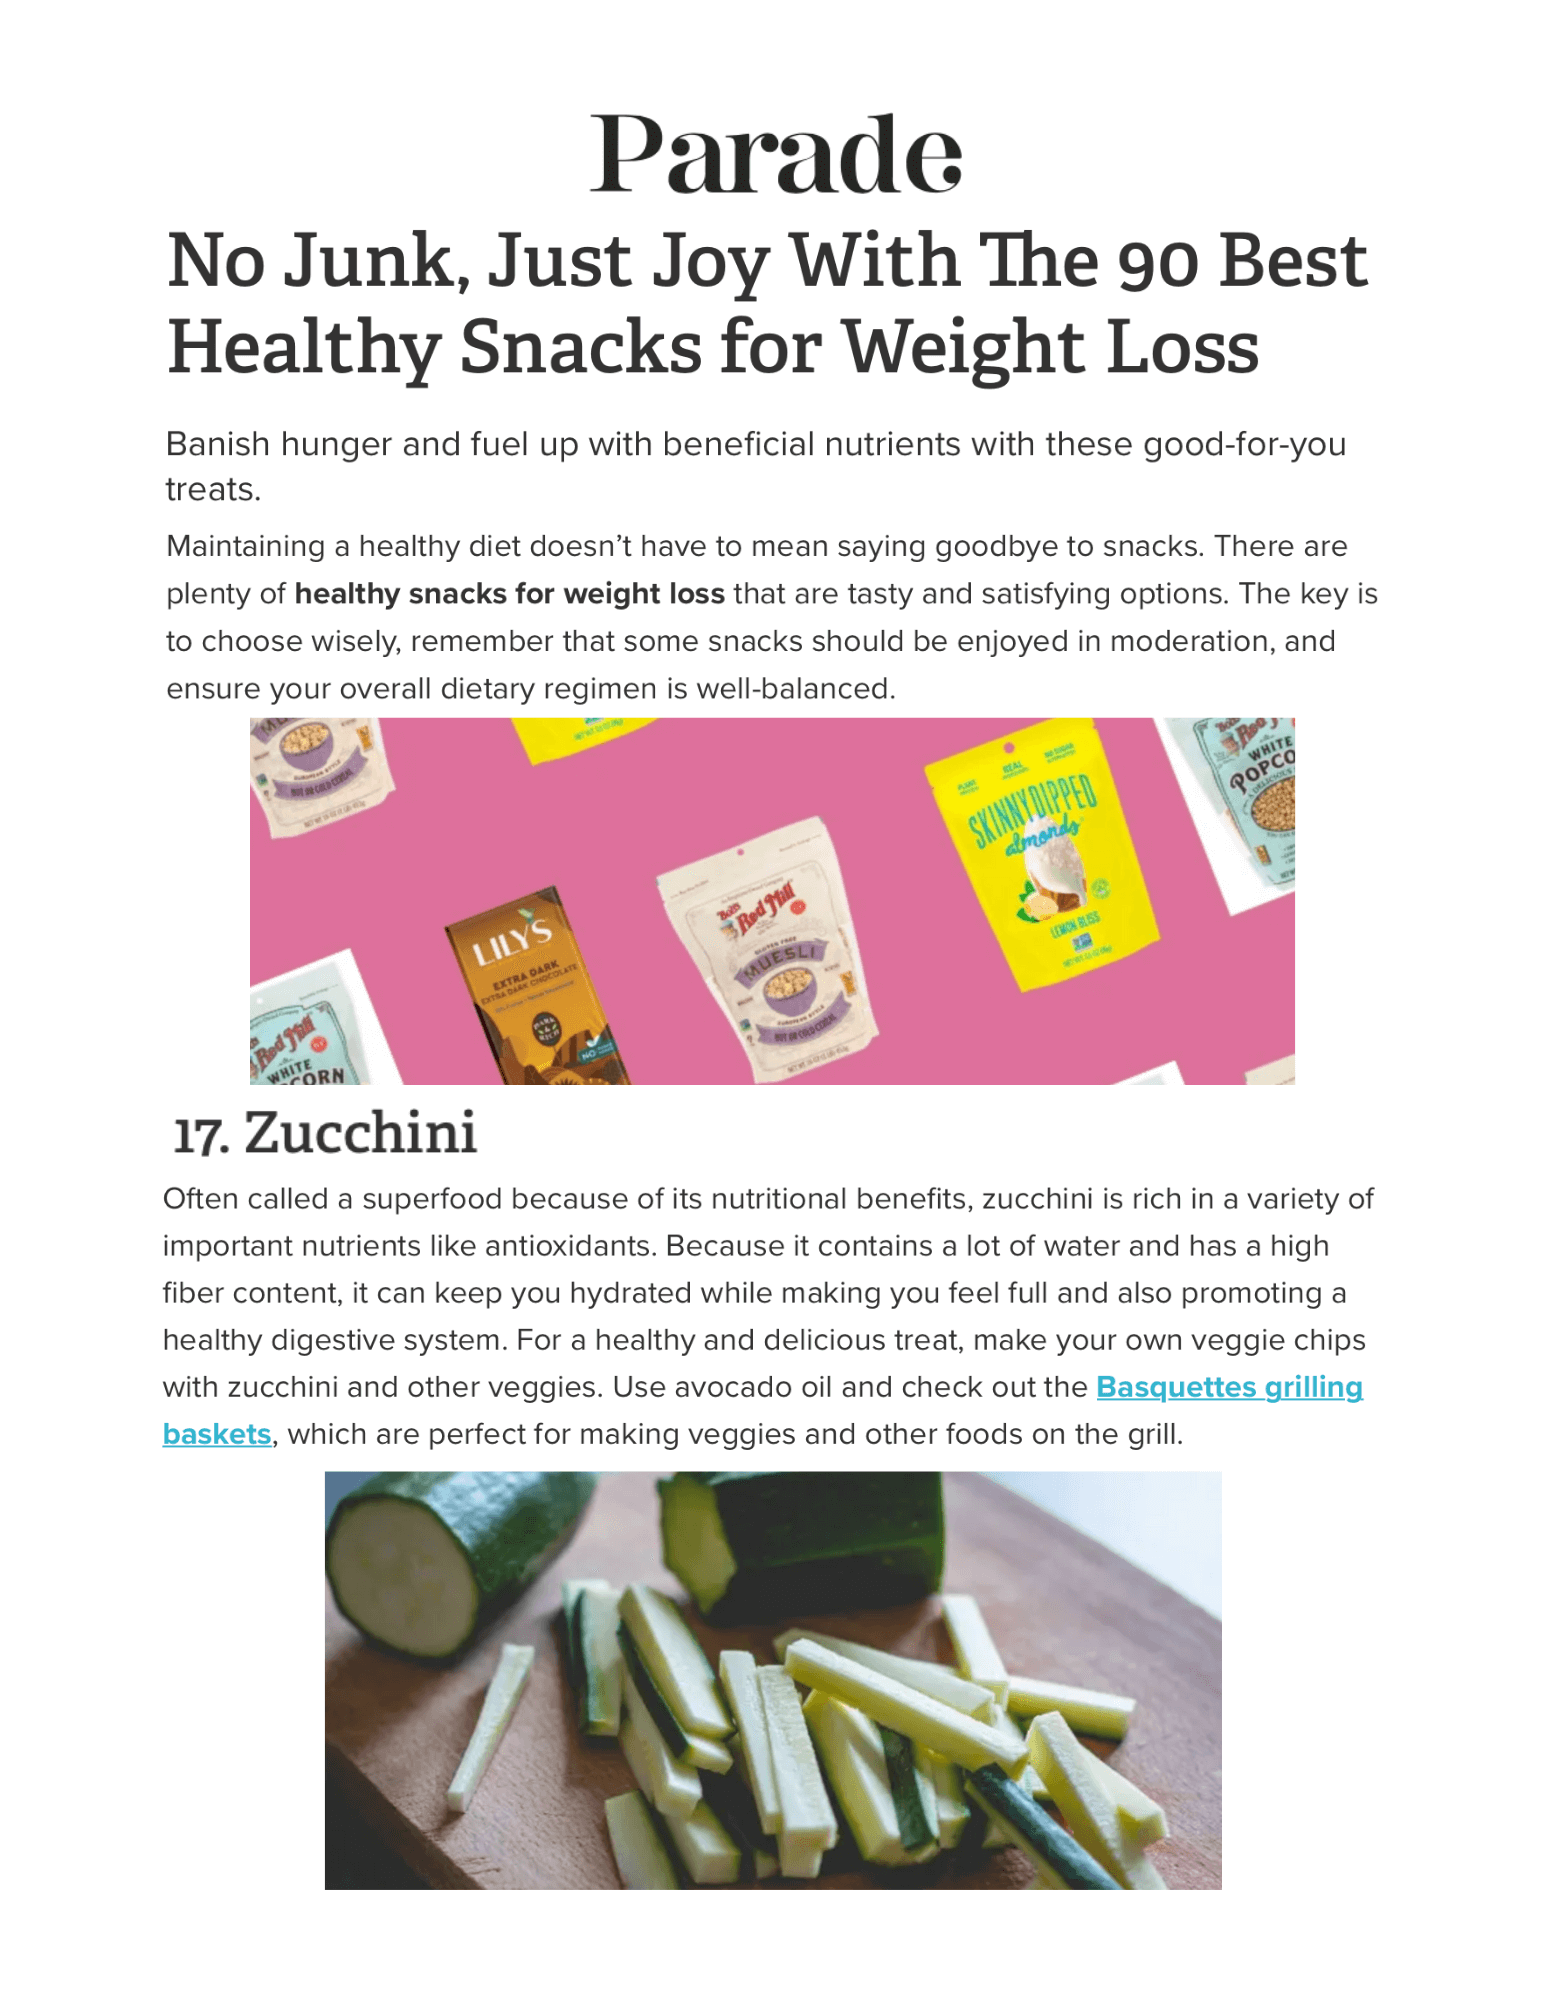 No Junk, Just Joy With The 90 Best Healthy Snacks For Weight Loss
Featured Brands include:Basquettes

Read More